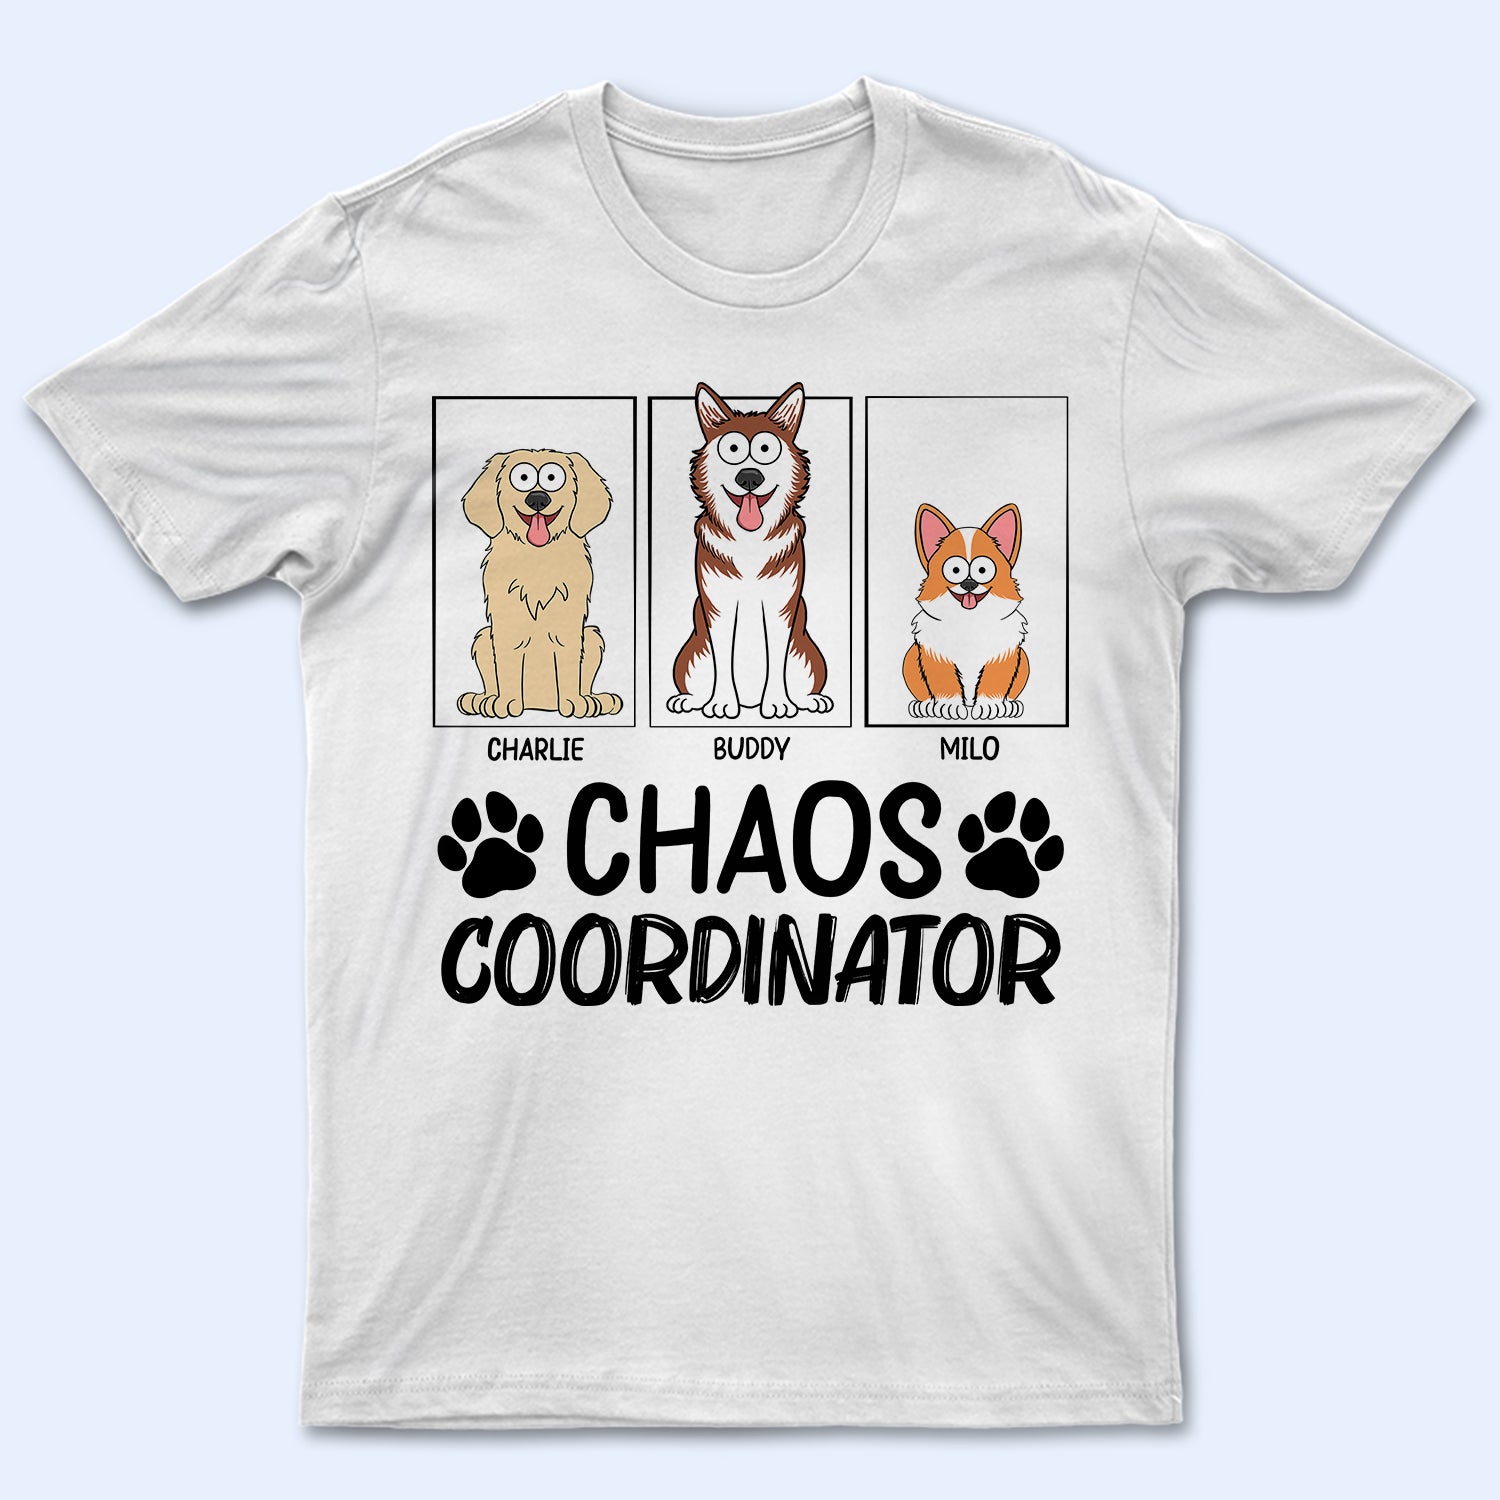 Chaos Coordinator - Birthday, Anniversary, Funny Gift For Dog Lovers, Dog Mom, Dog Dad - Personalized T Shirt